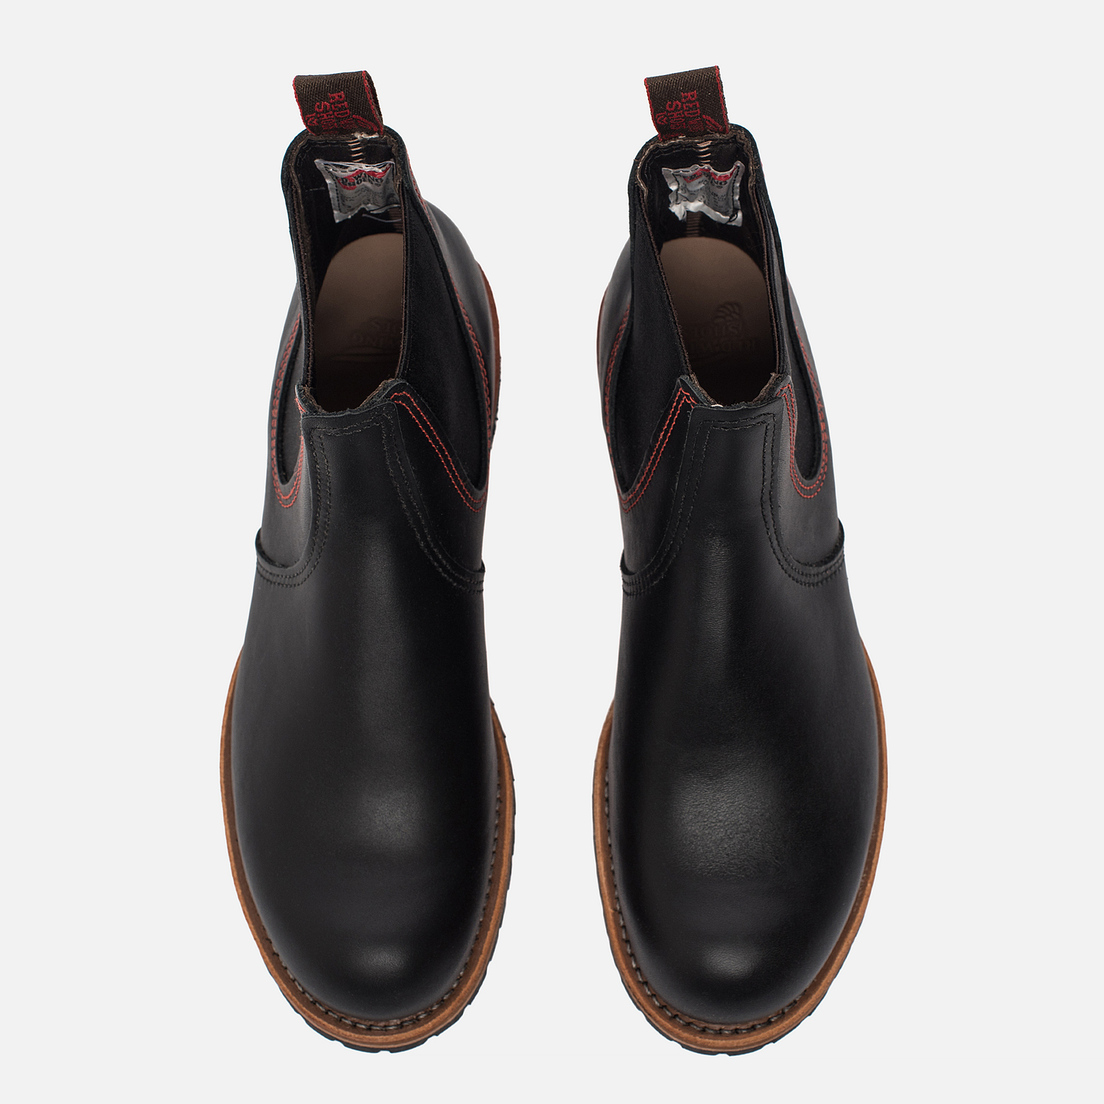 Red Wing Shoes Мужские ботинки 2918 Chelsea Rancher Leather